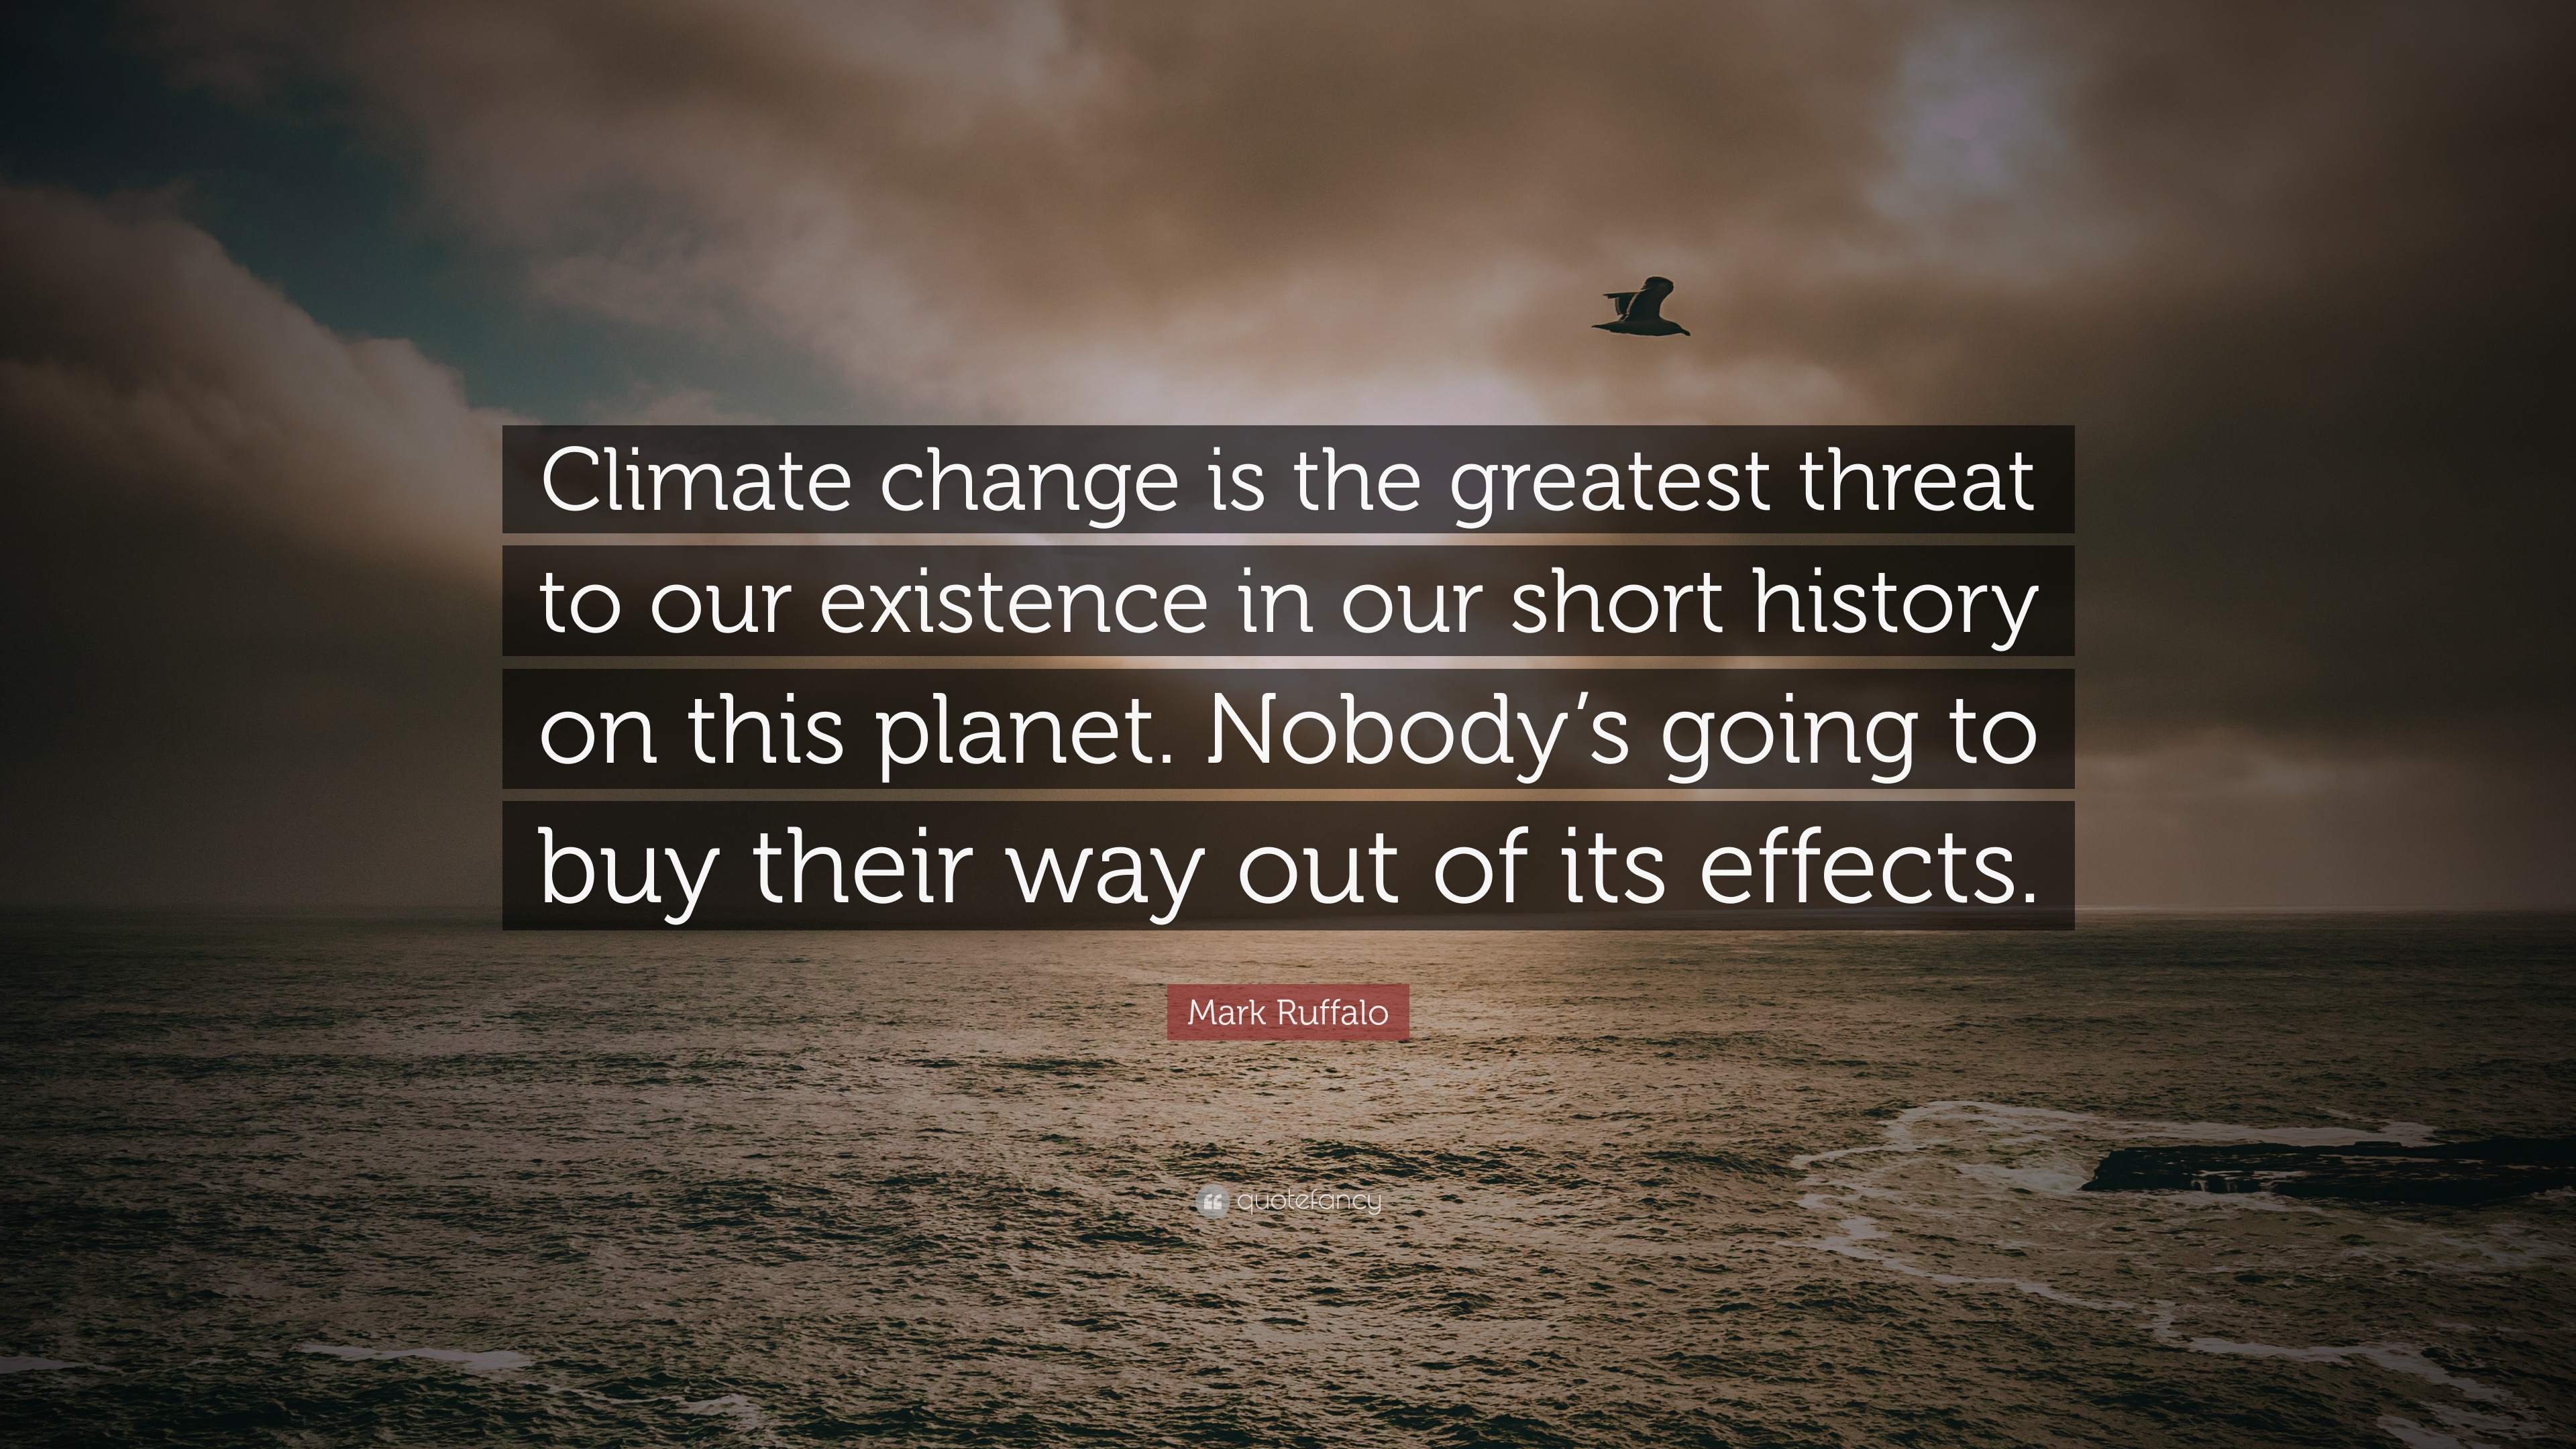 Mark Ruffalo Quote: “Climate change is the greatest threat to our ...